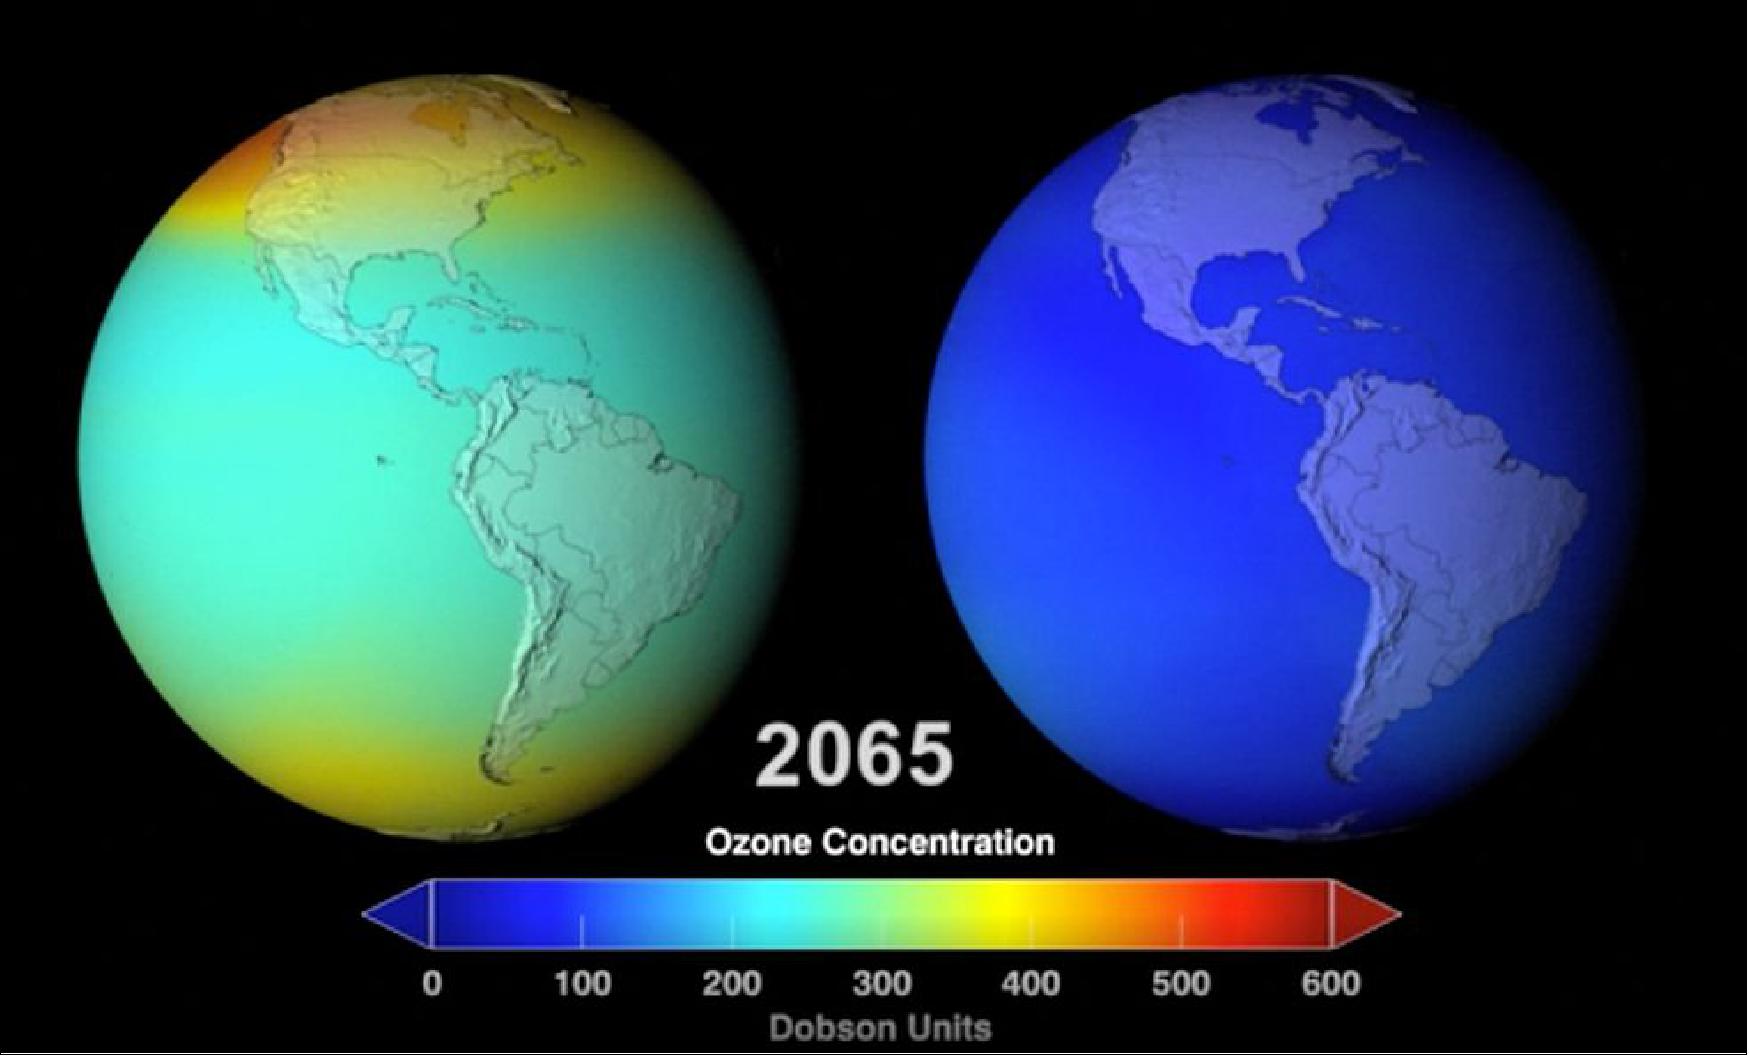 Figure 19: Previous "world-avoided" experiments have shown that, without the Montreal Protocol, ozone levels would be depleted globally by the mid-twentieth century (image credits: NASA/Goddard Space Flight Center Scientific Visualization Studio)